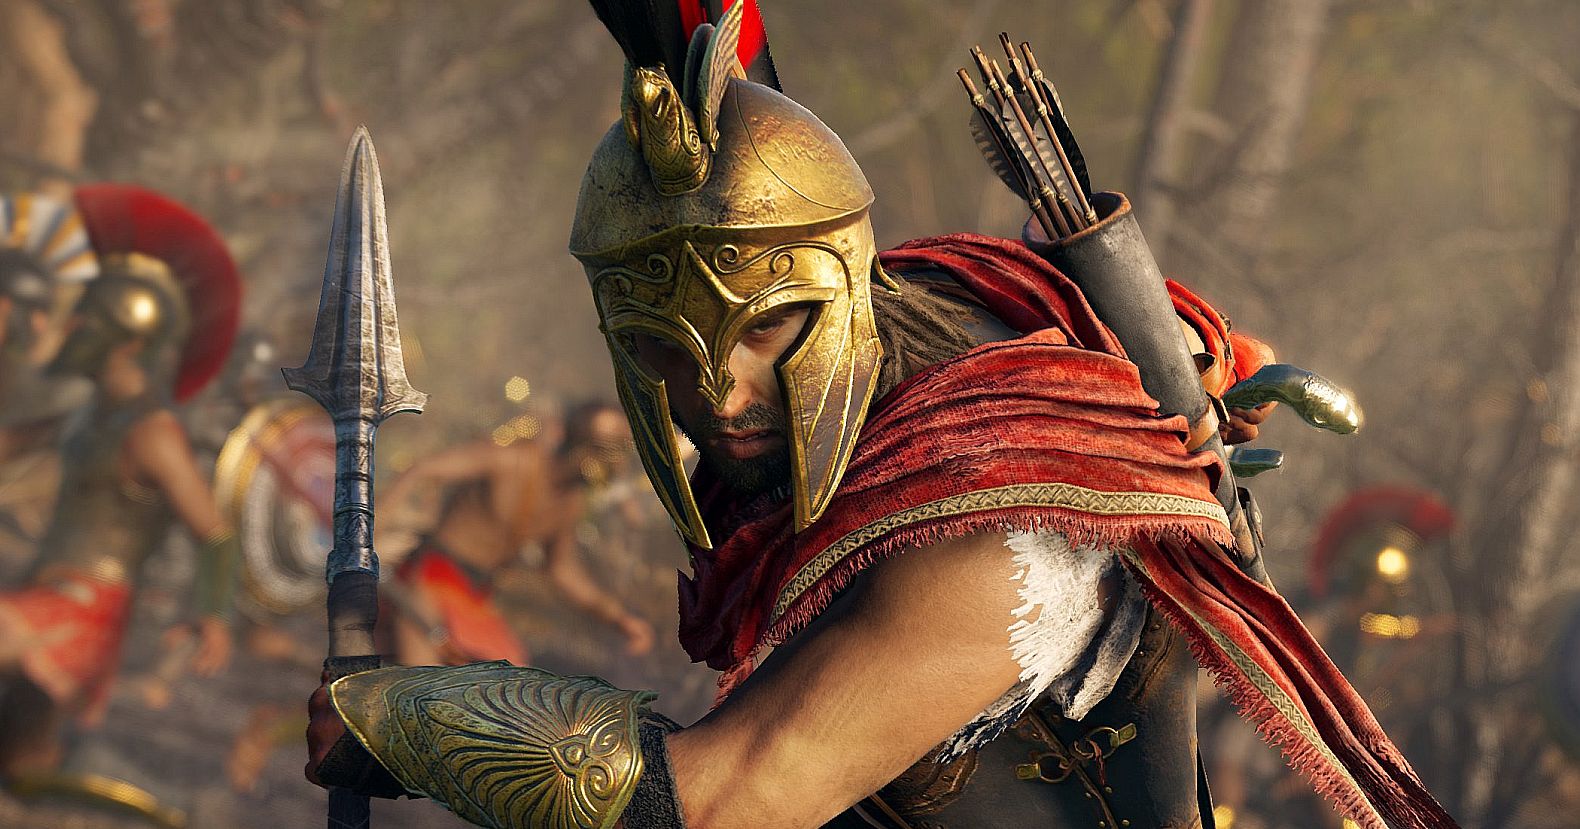 Image for Ubisoft releases Assassin's Creed Odyssey musical theme as a single